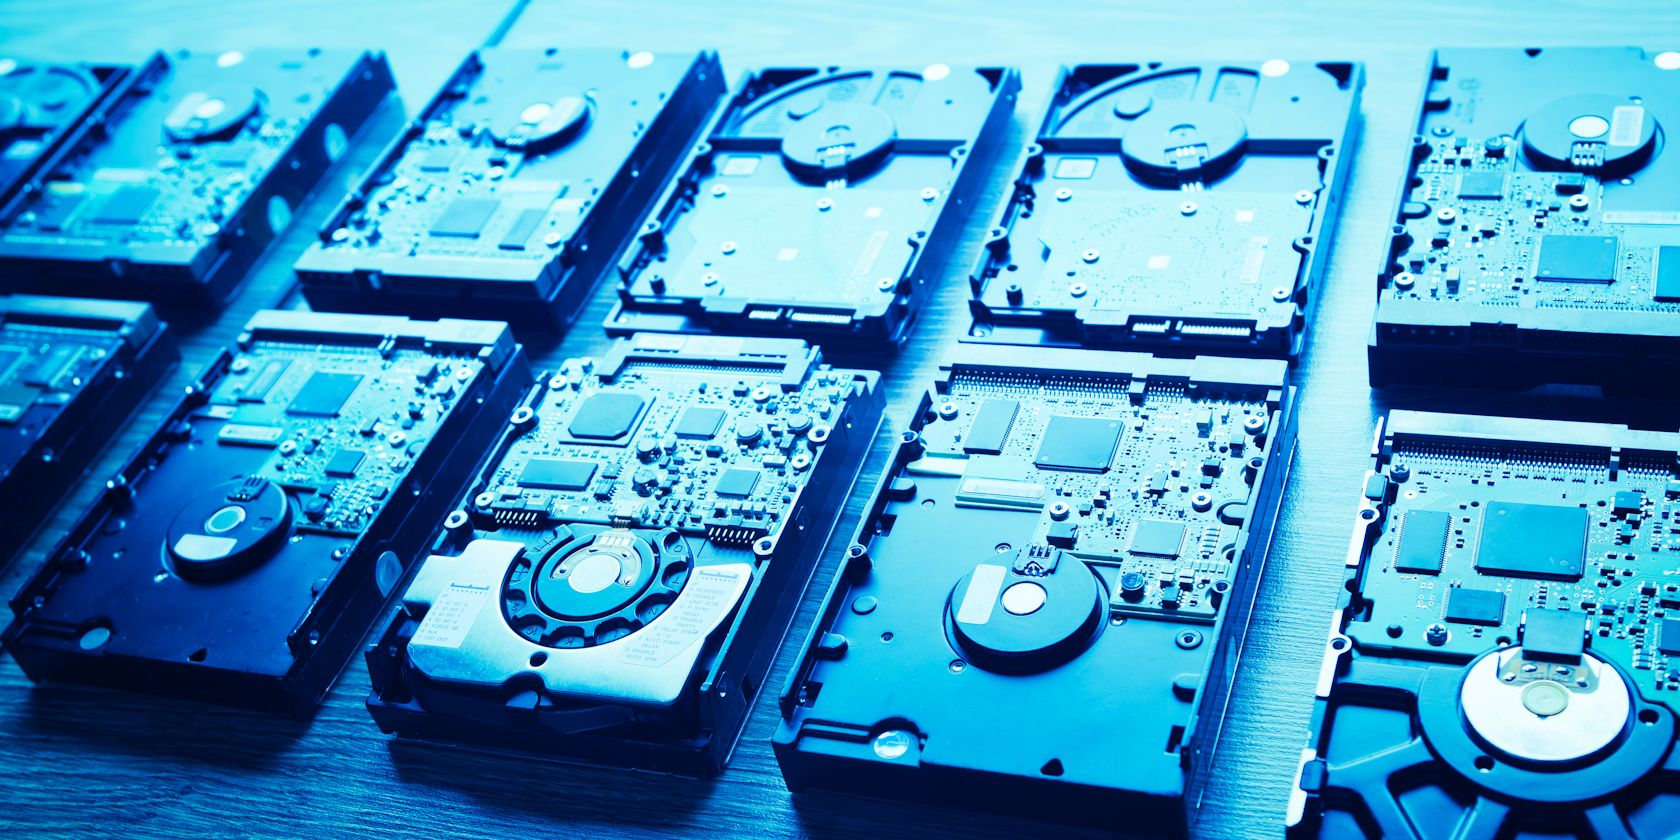 two rows of hard drives under a bright blue light